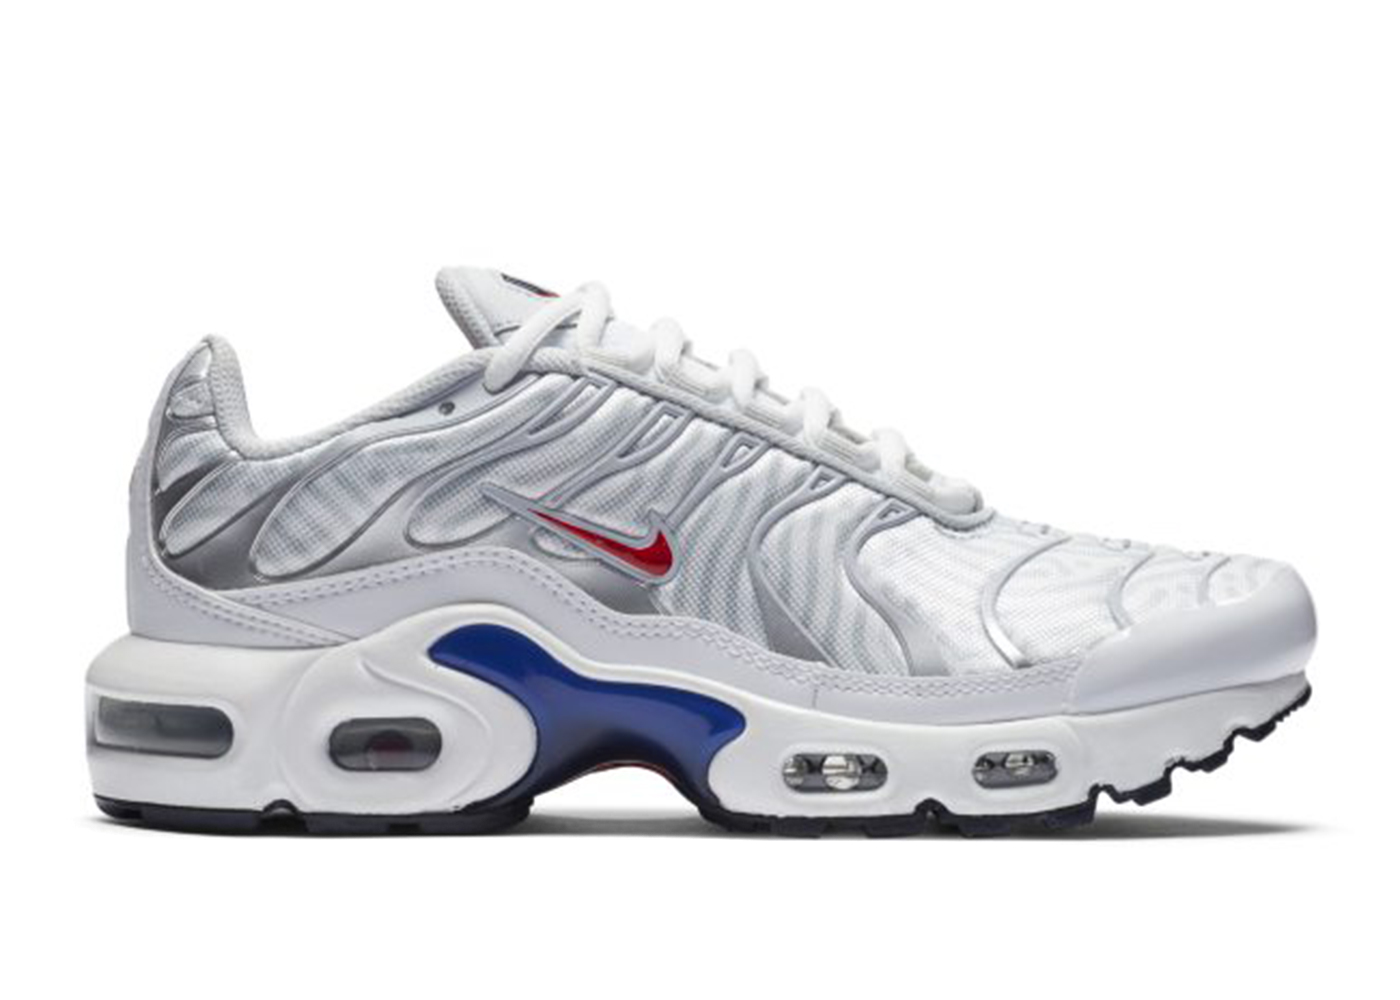 white and red air max plus